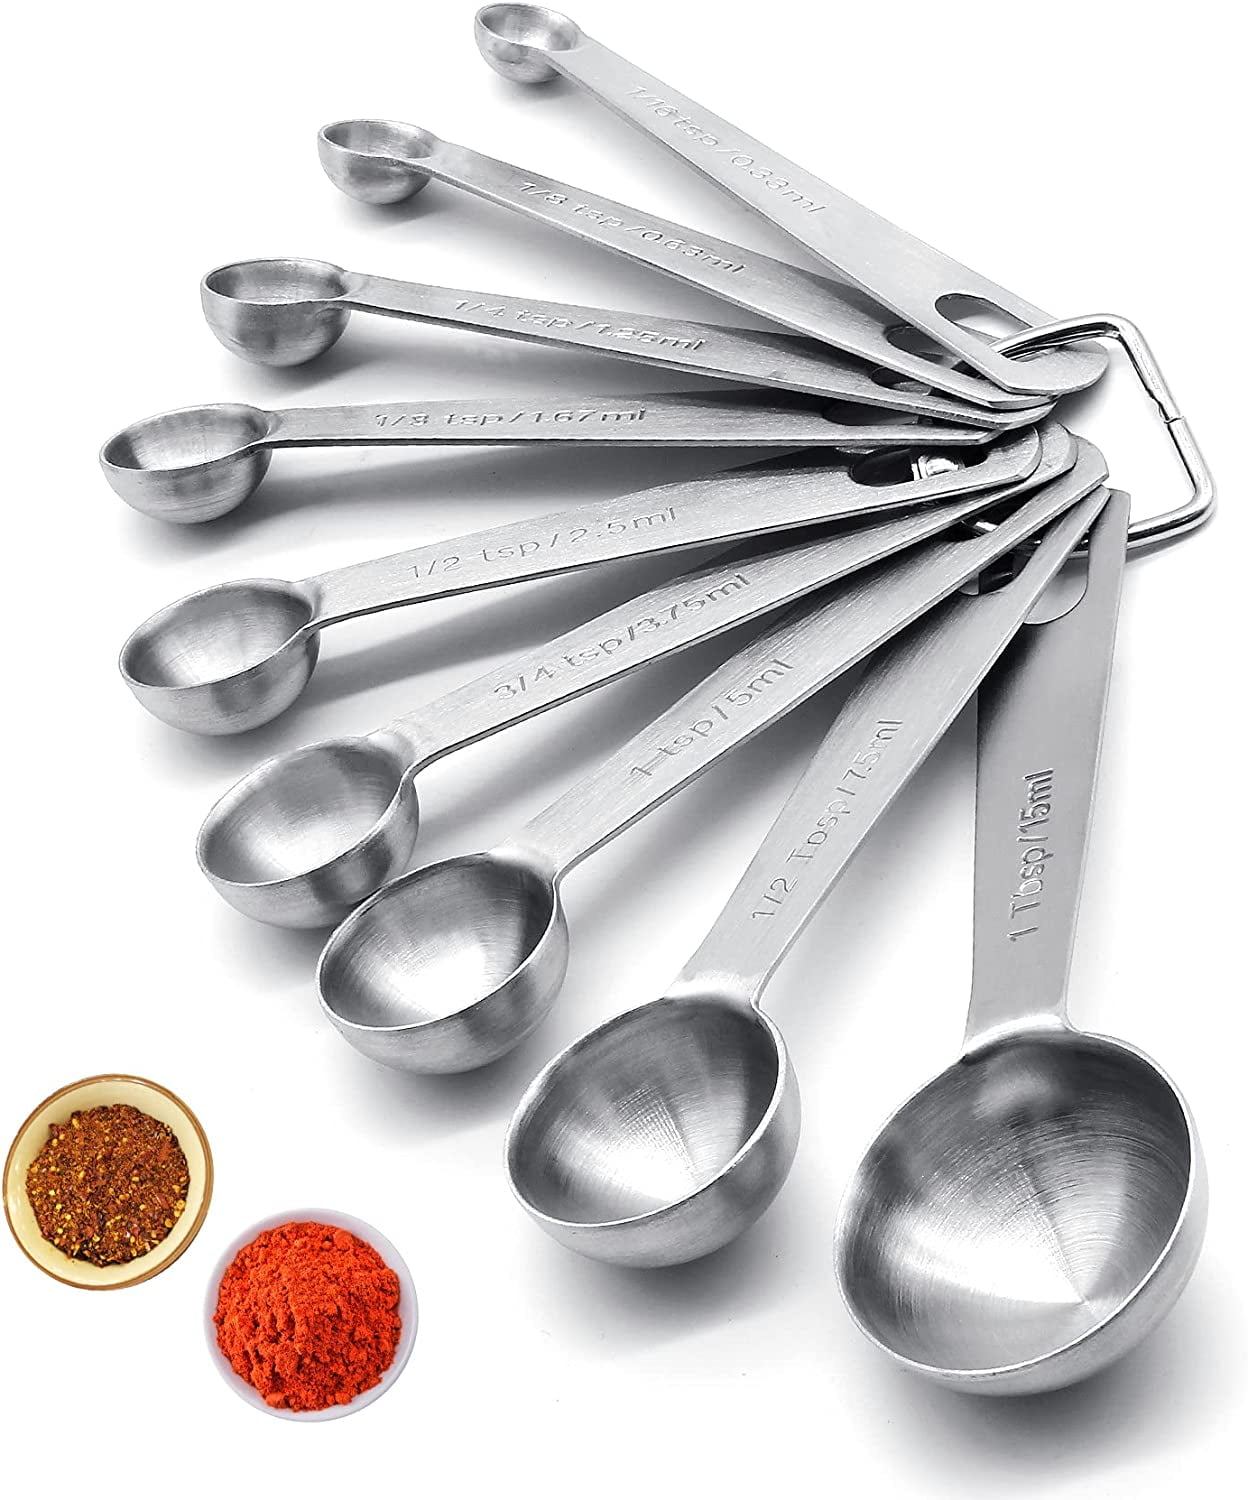 3 Pack of Stevia Measuring Spoons. Tiny Measuring Spoon. 